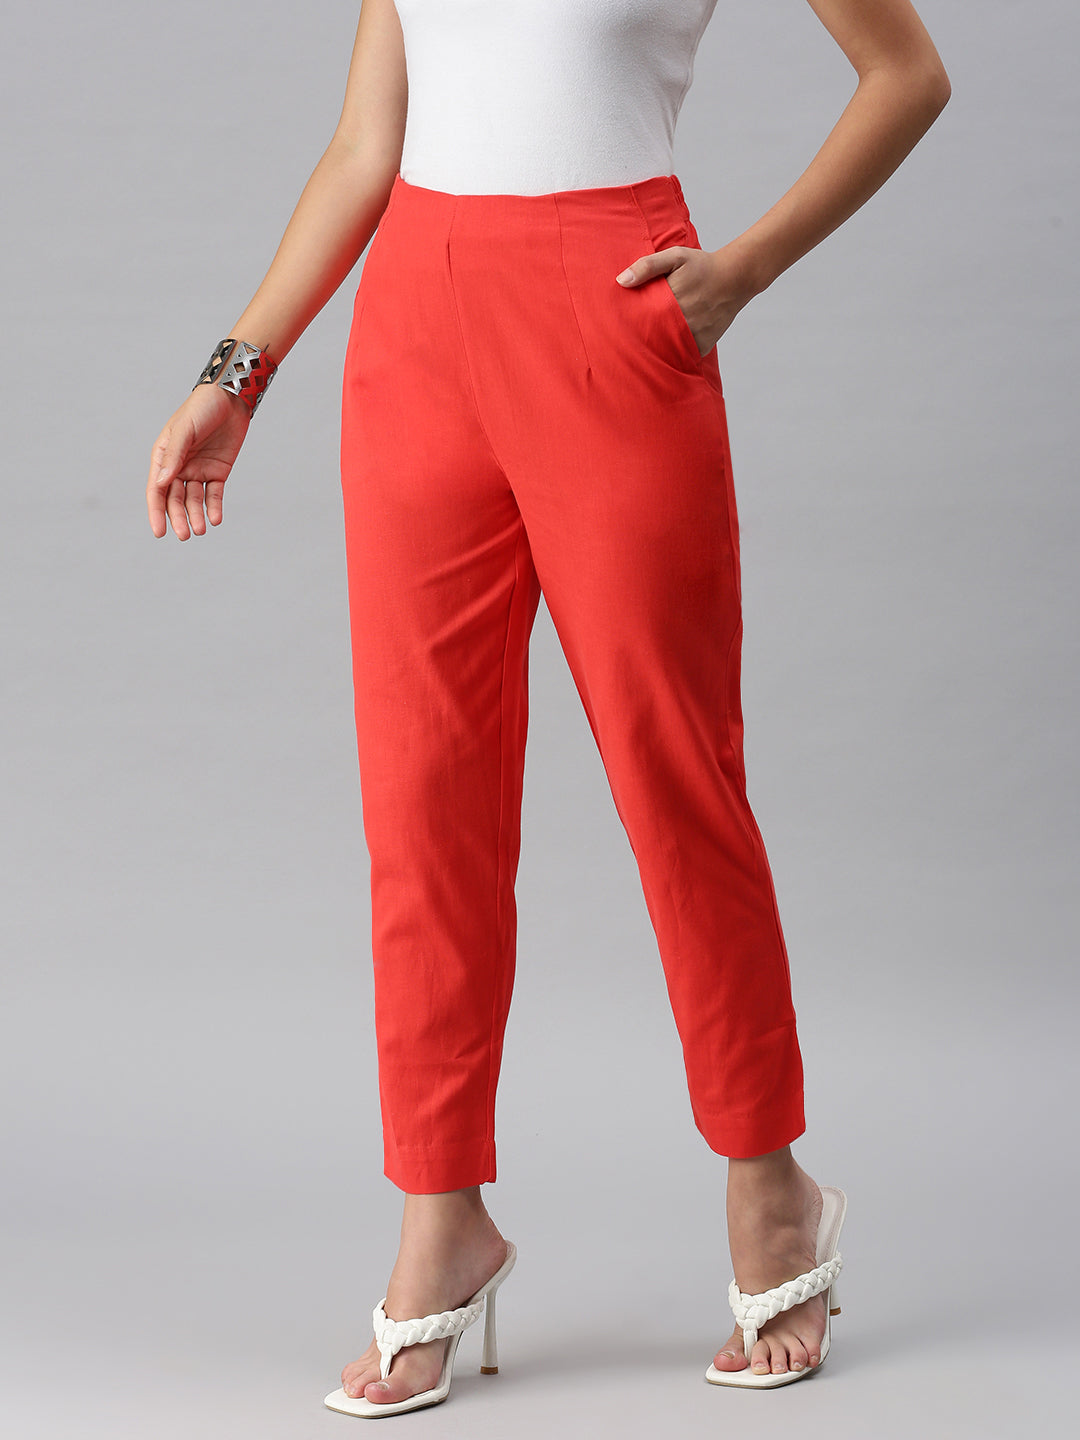 Unique Vintage Red Stretch High Waist Rizzo Cigarette Pants - ShopperBoard